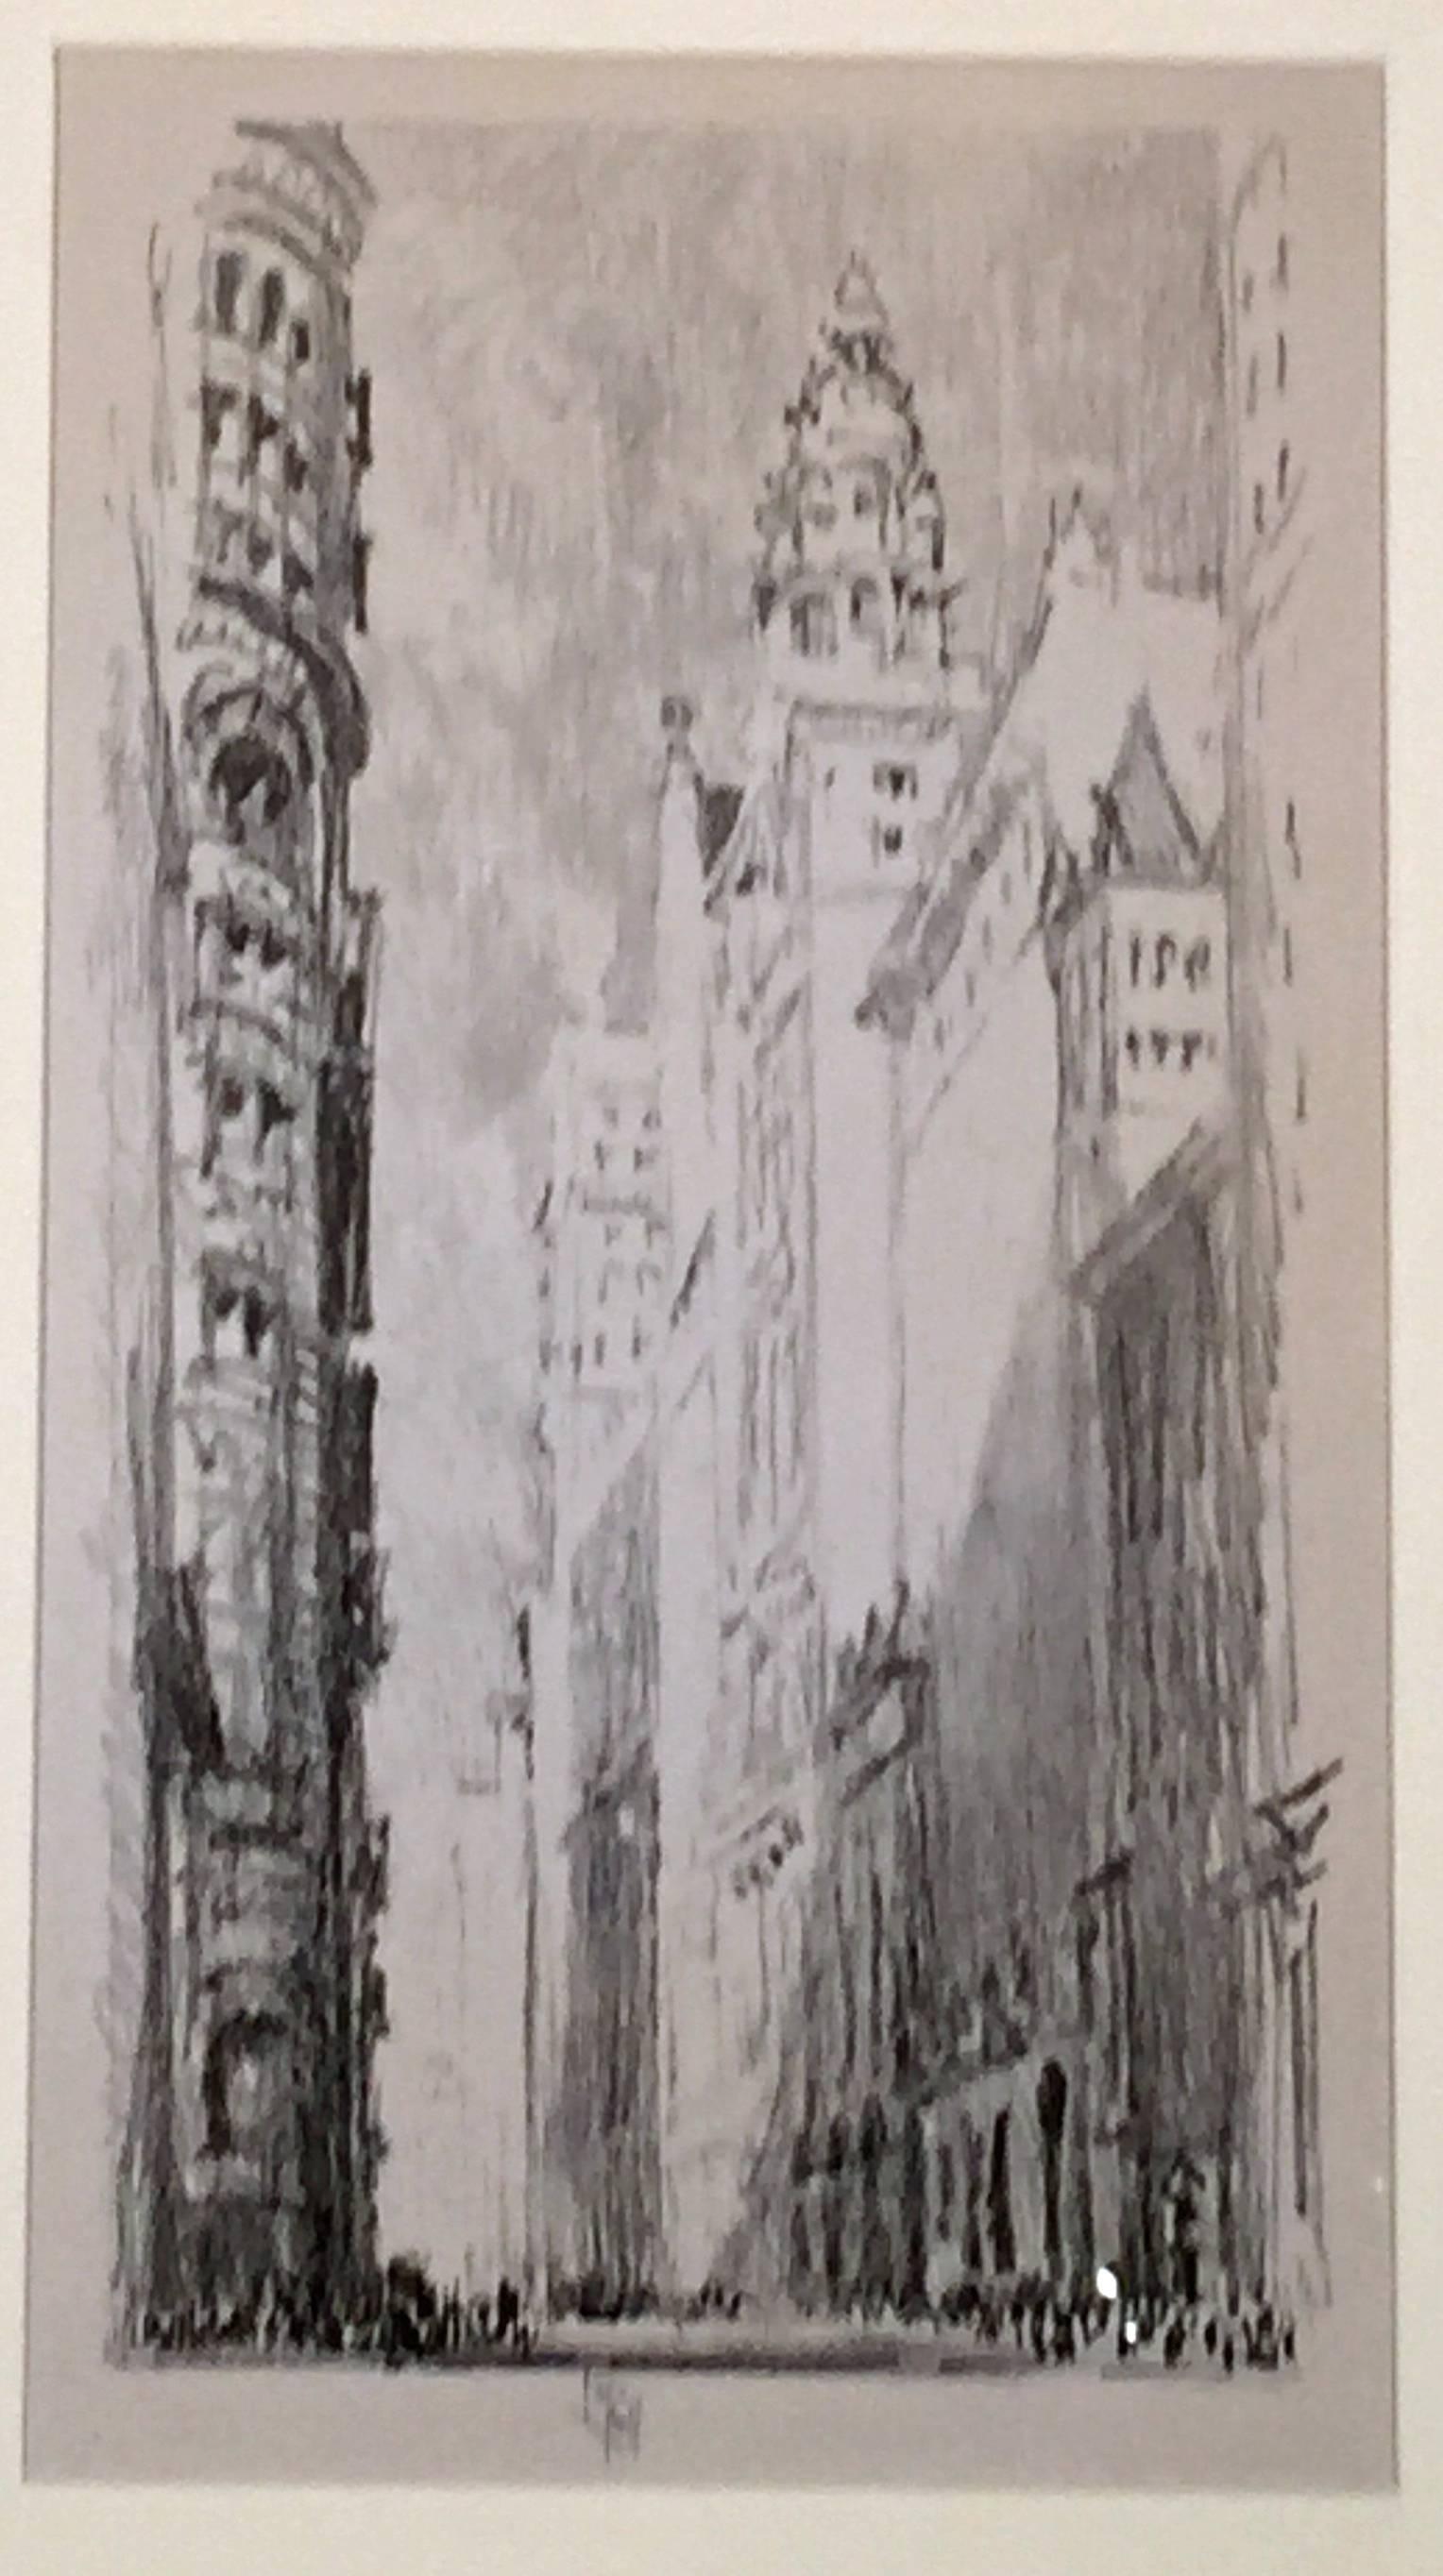 LITHOGRAPHS OF NEW YORK - Print by Joseph Pennell